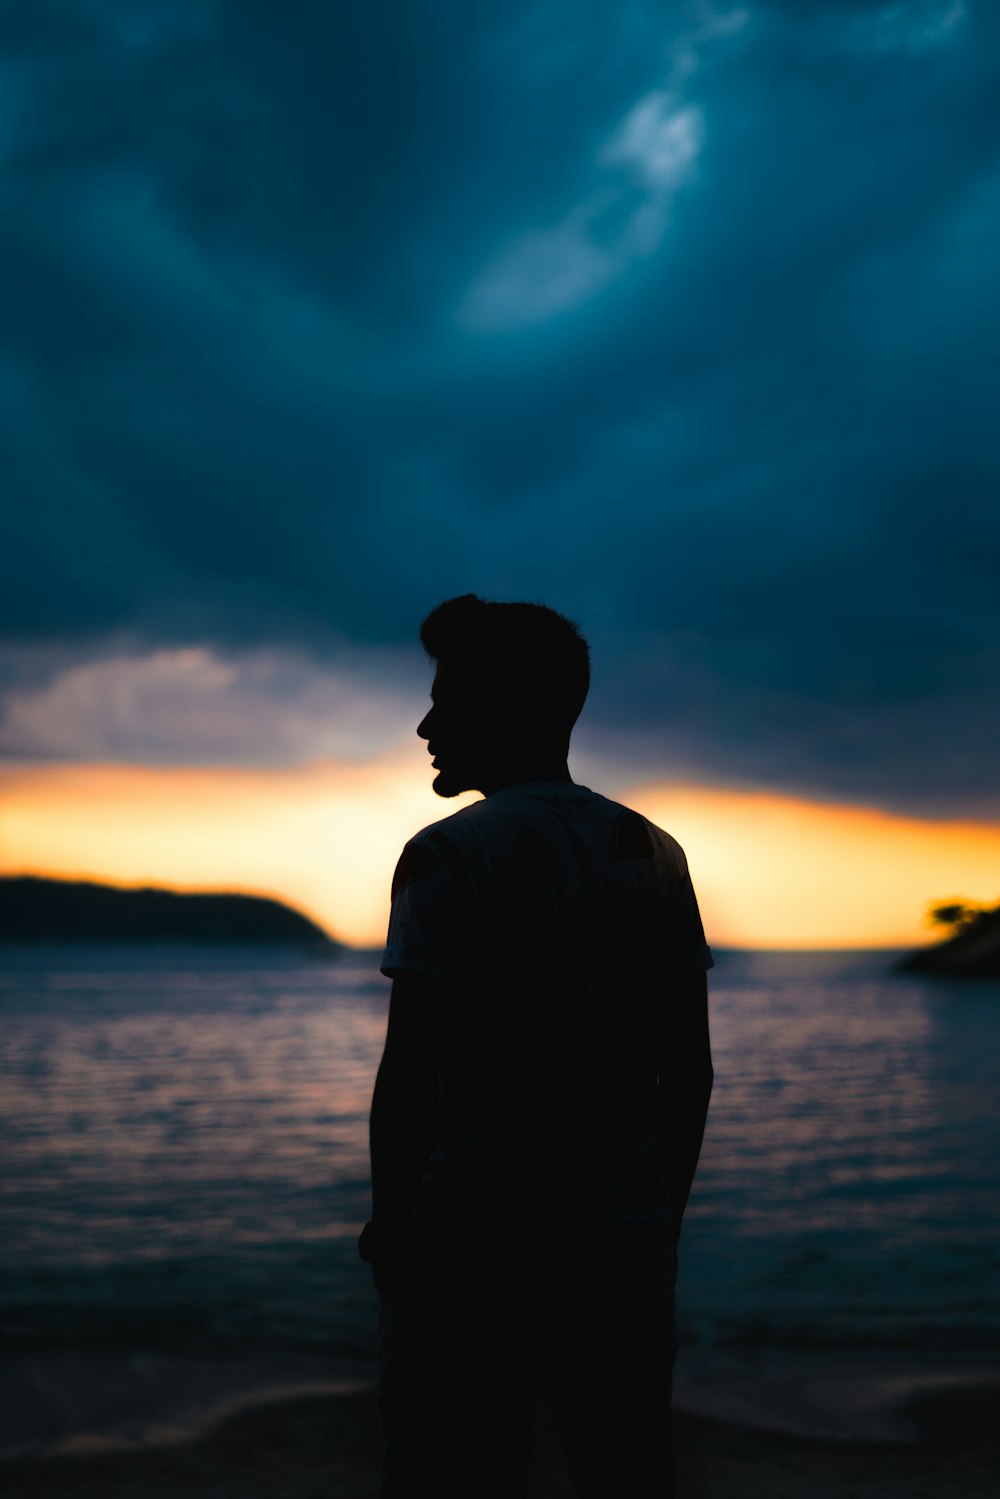 silhouette of man standing near body of water during sunset